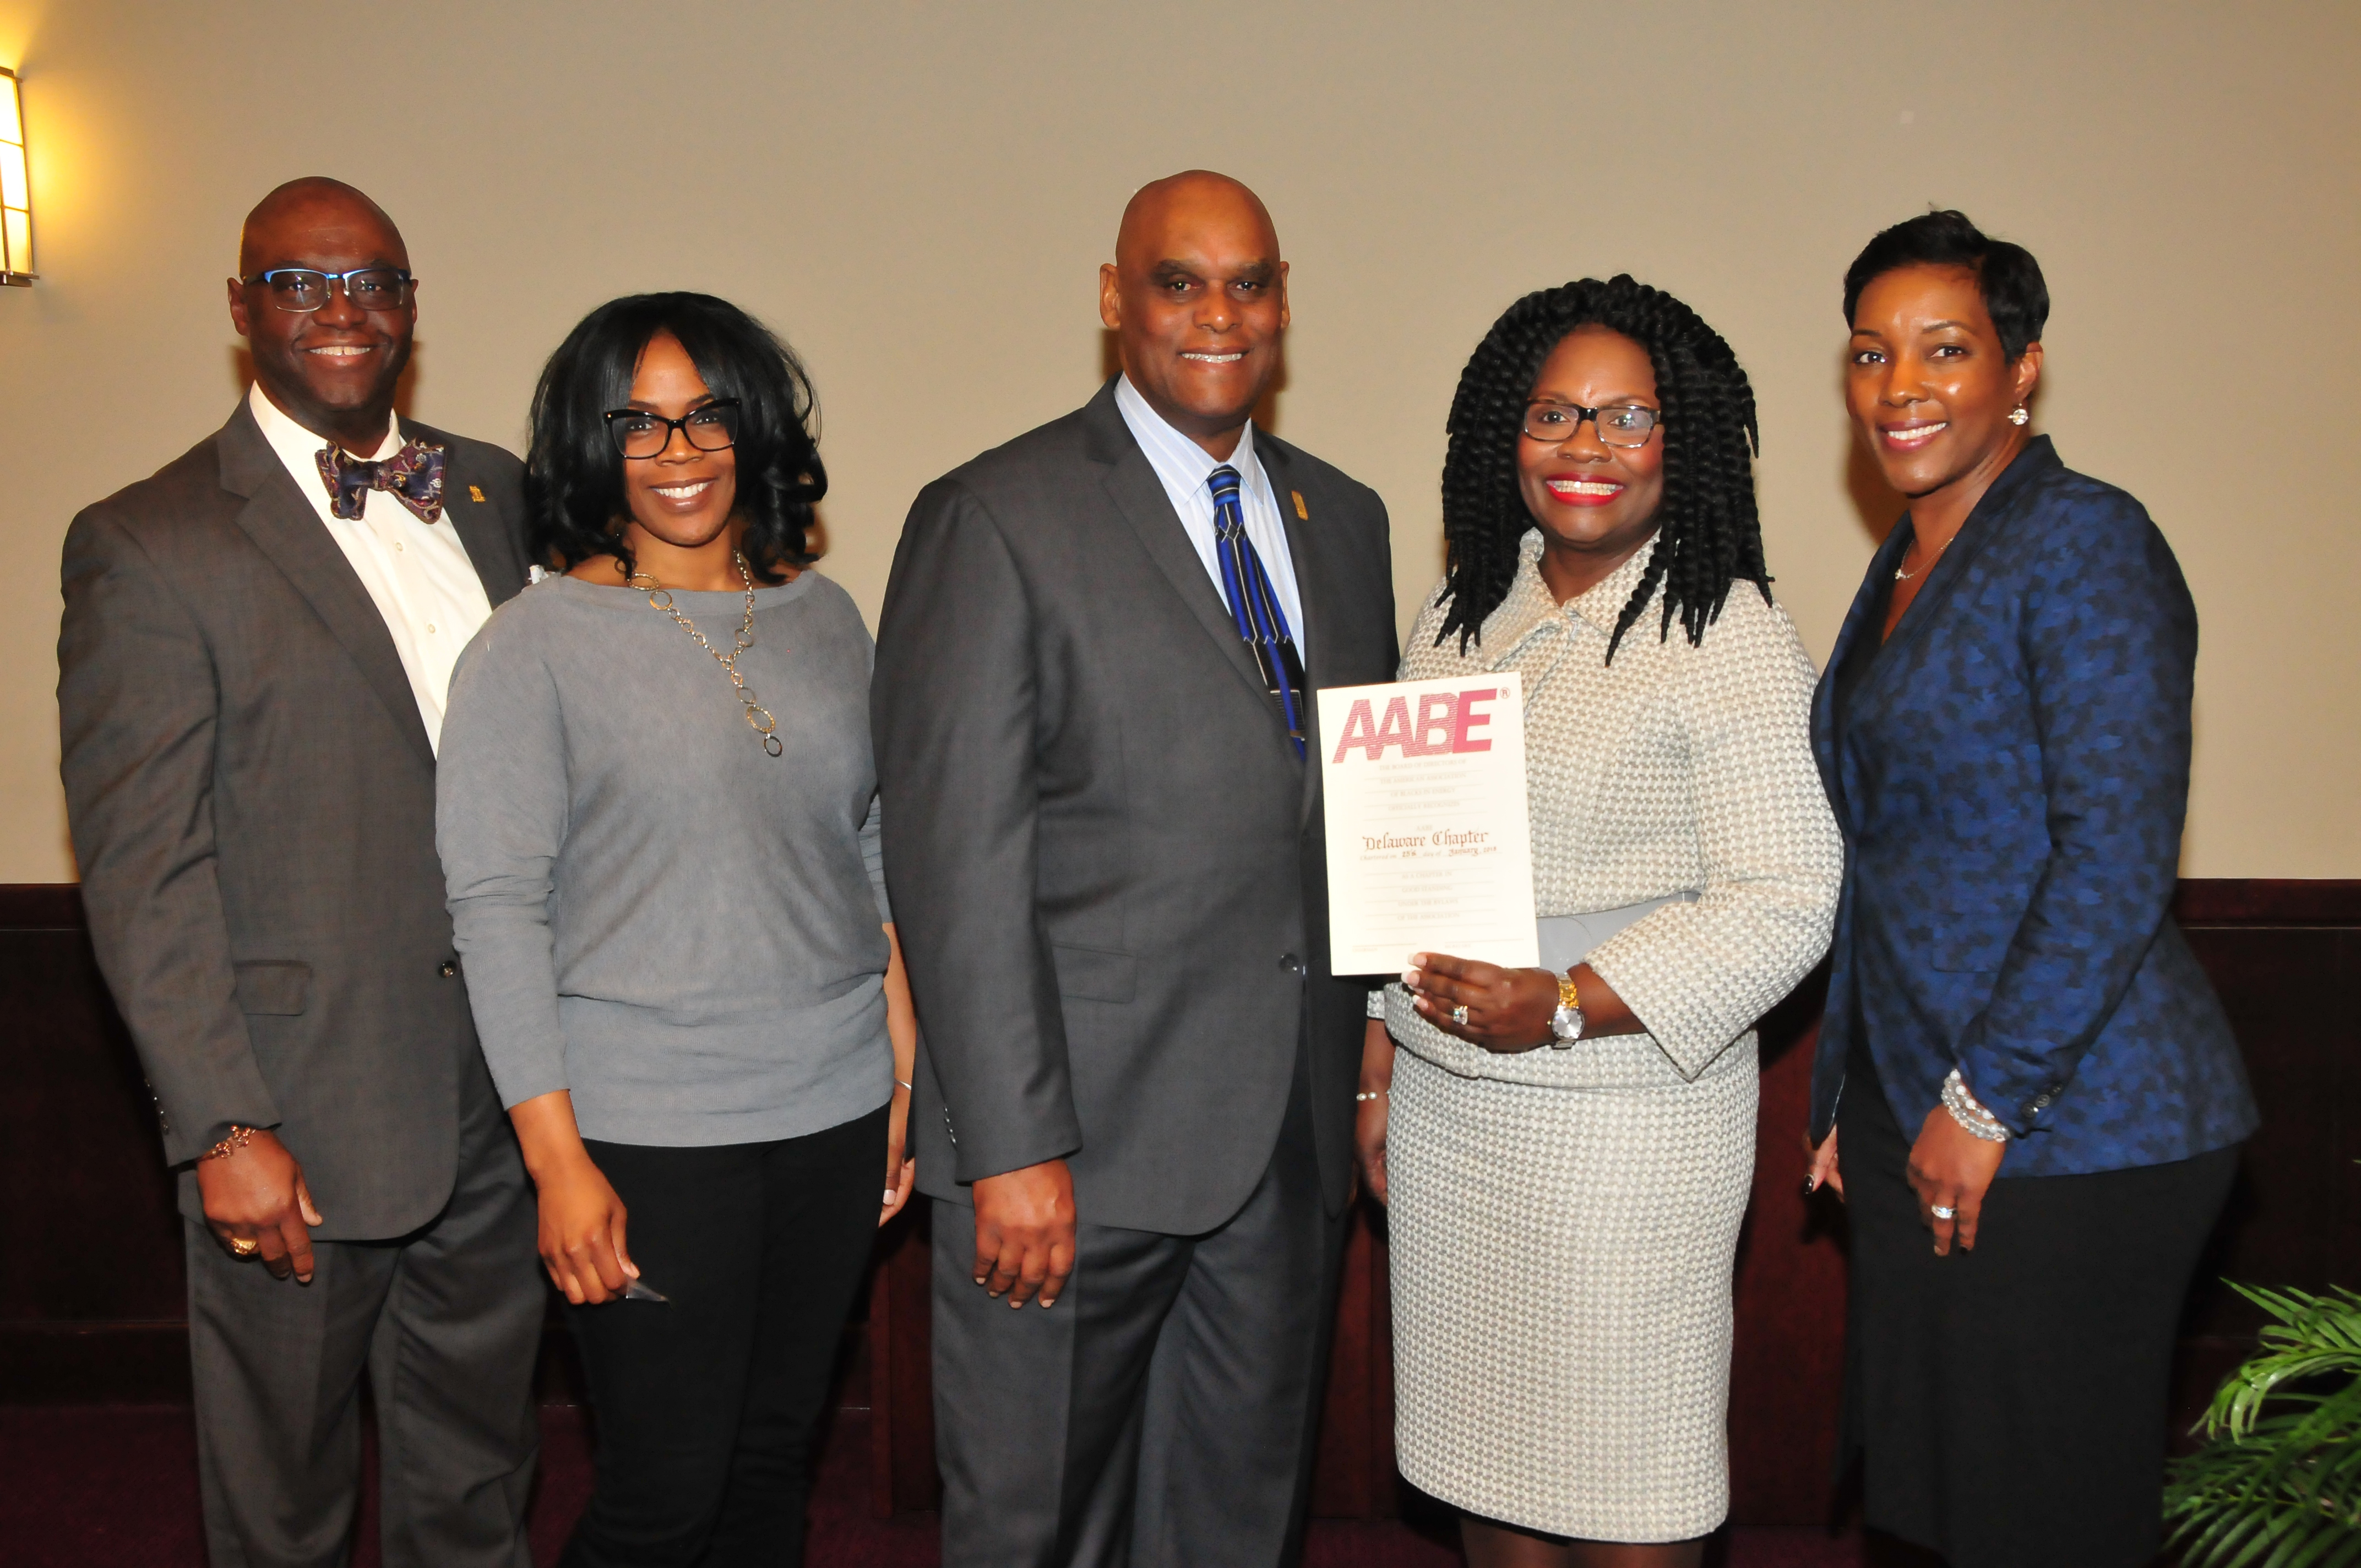 John Allen of Delmarva Power, along with Amber Young, William Pickrum, Enid Wallace-Simms, secretary, vice president and president, respectively; along with Paula Glover, national AABE president/CEO, celebrate the new Delaware AABE Chapter. 